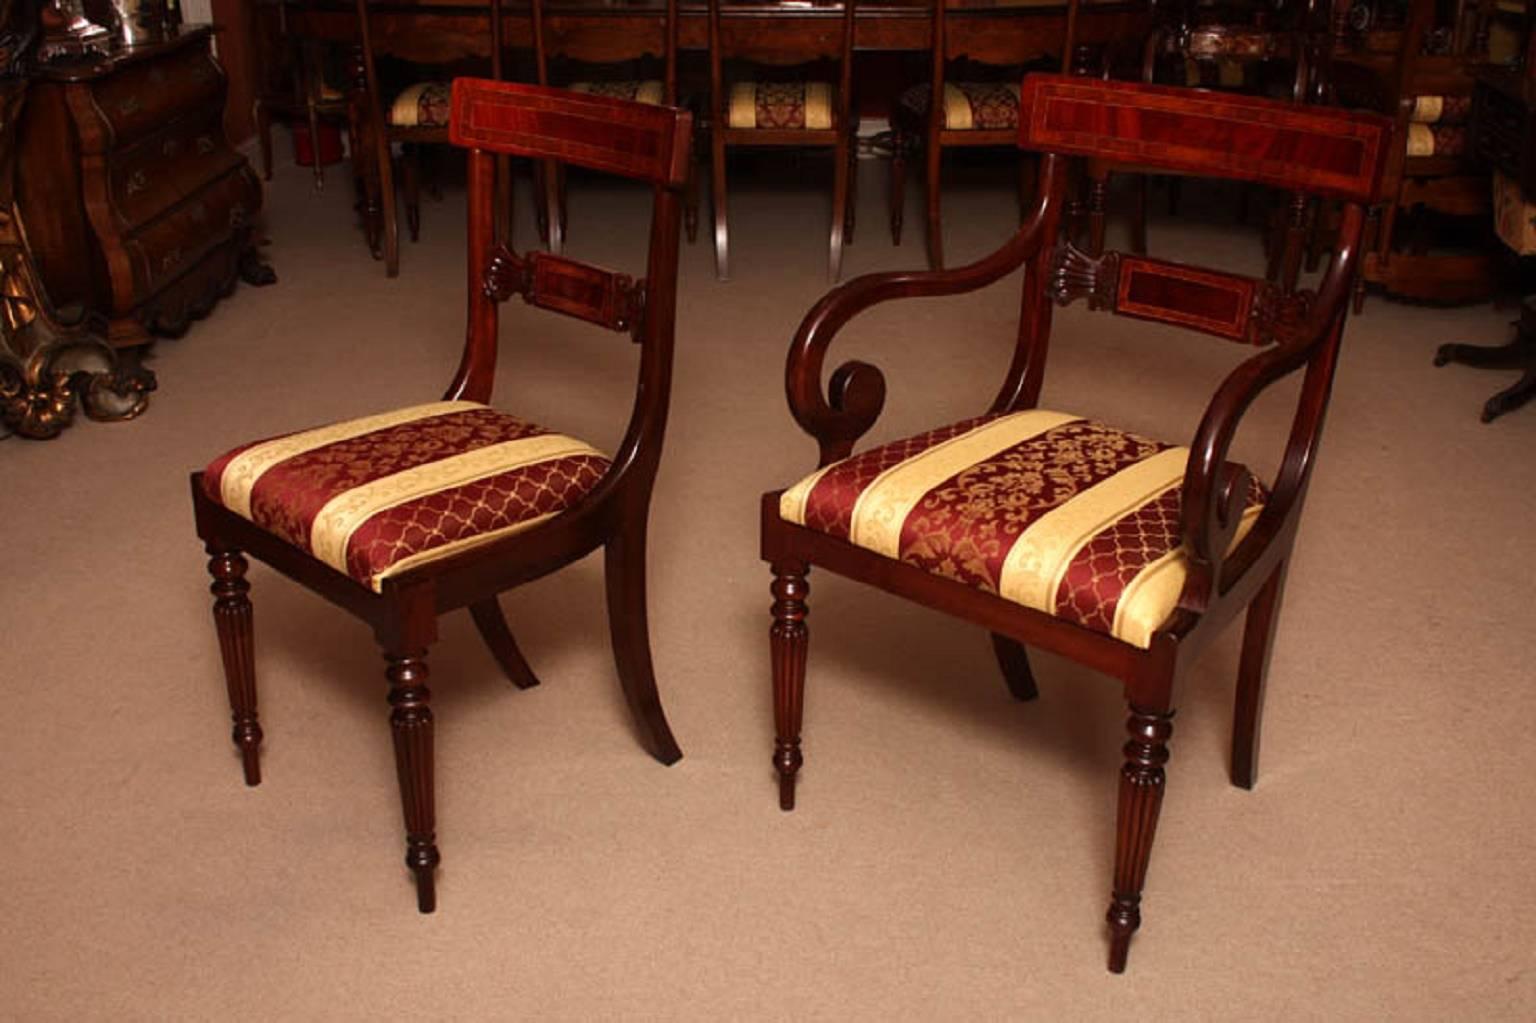 Regency Dining Table and 16 Chairs Flame Mahogany 3